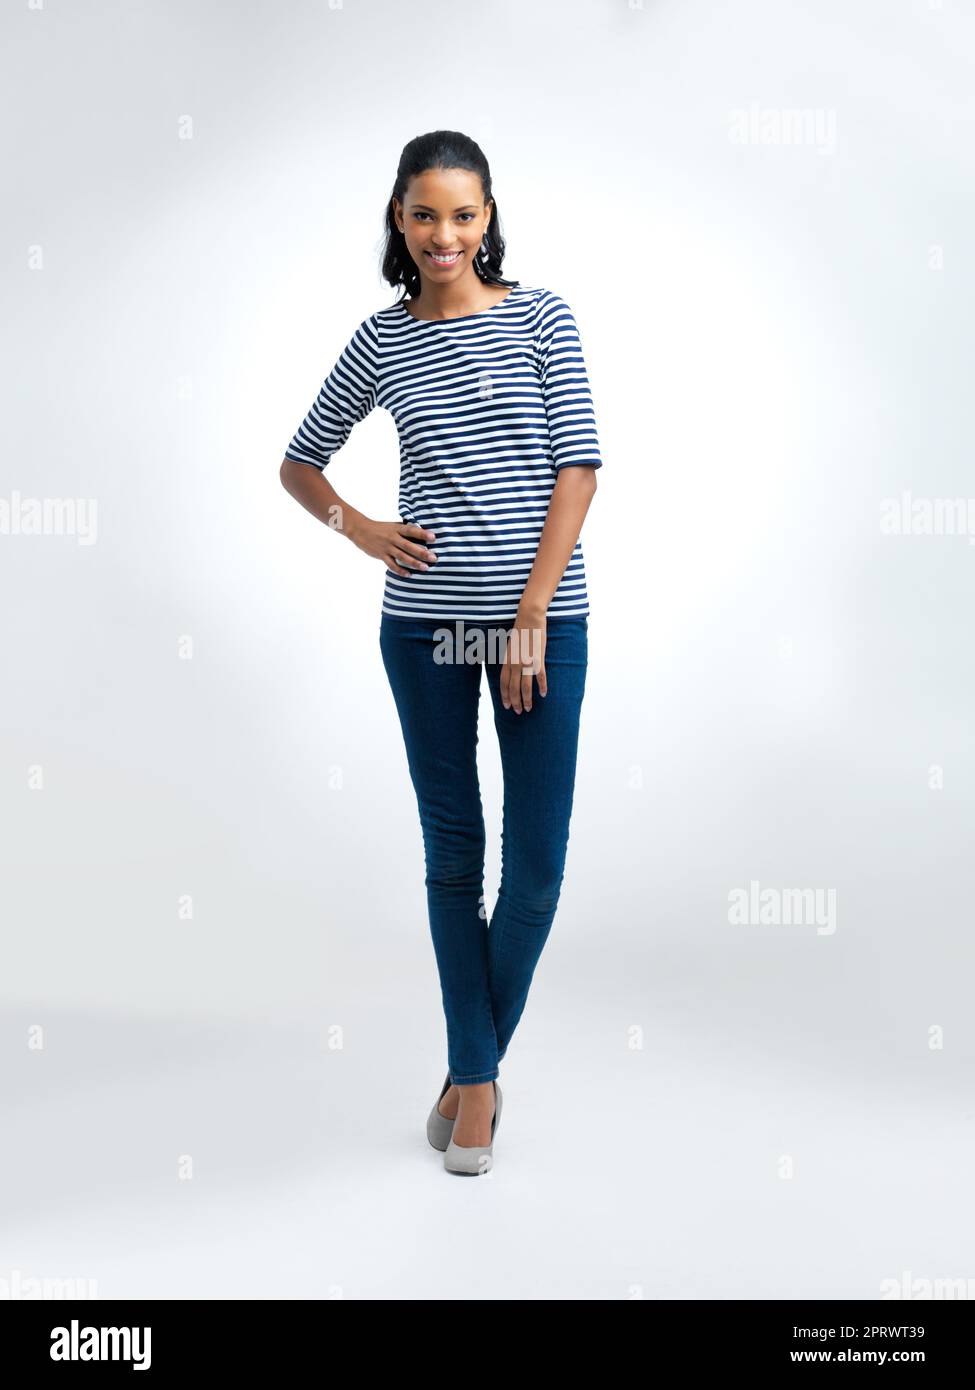 Loving her casual look. Full length studio portrait of a young african american woman isolated on white. Stock Photo